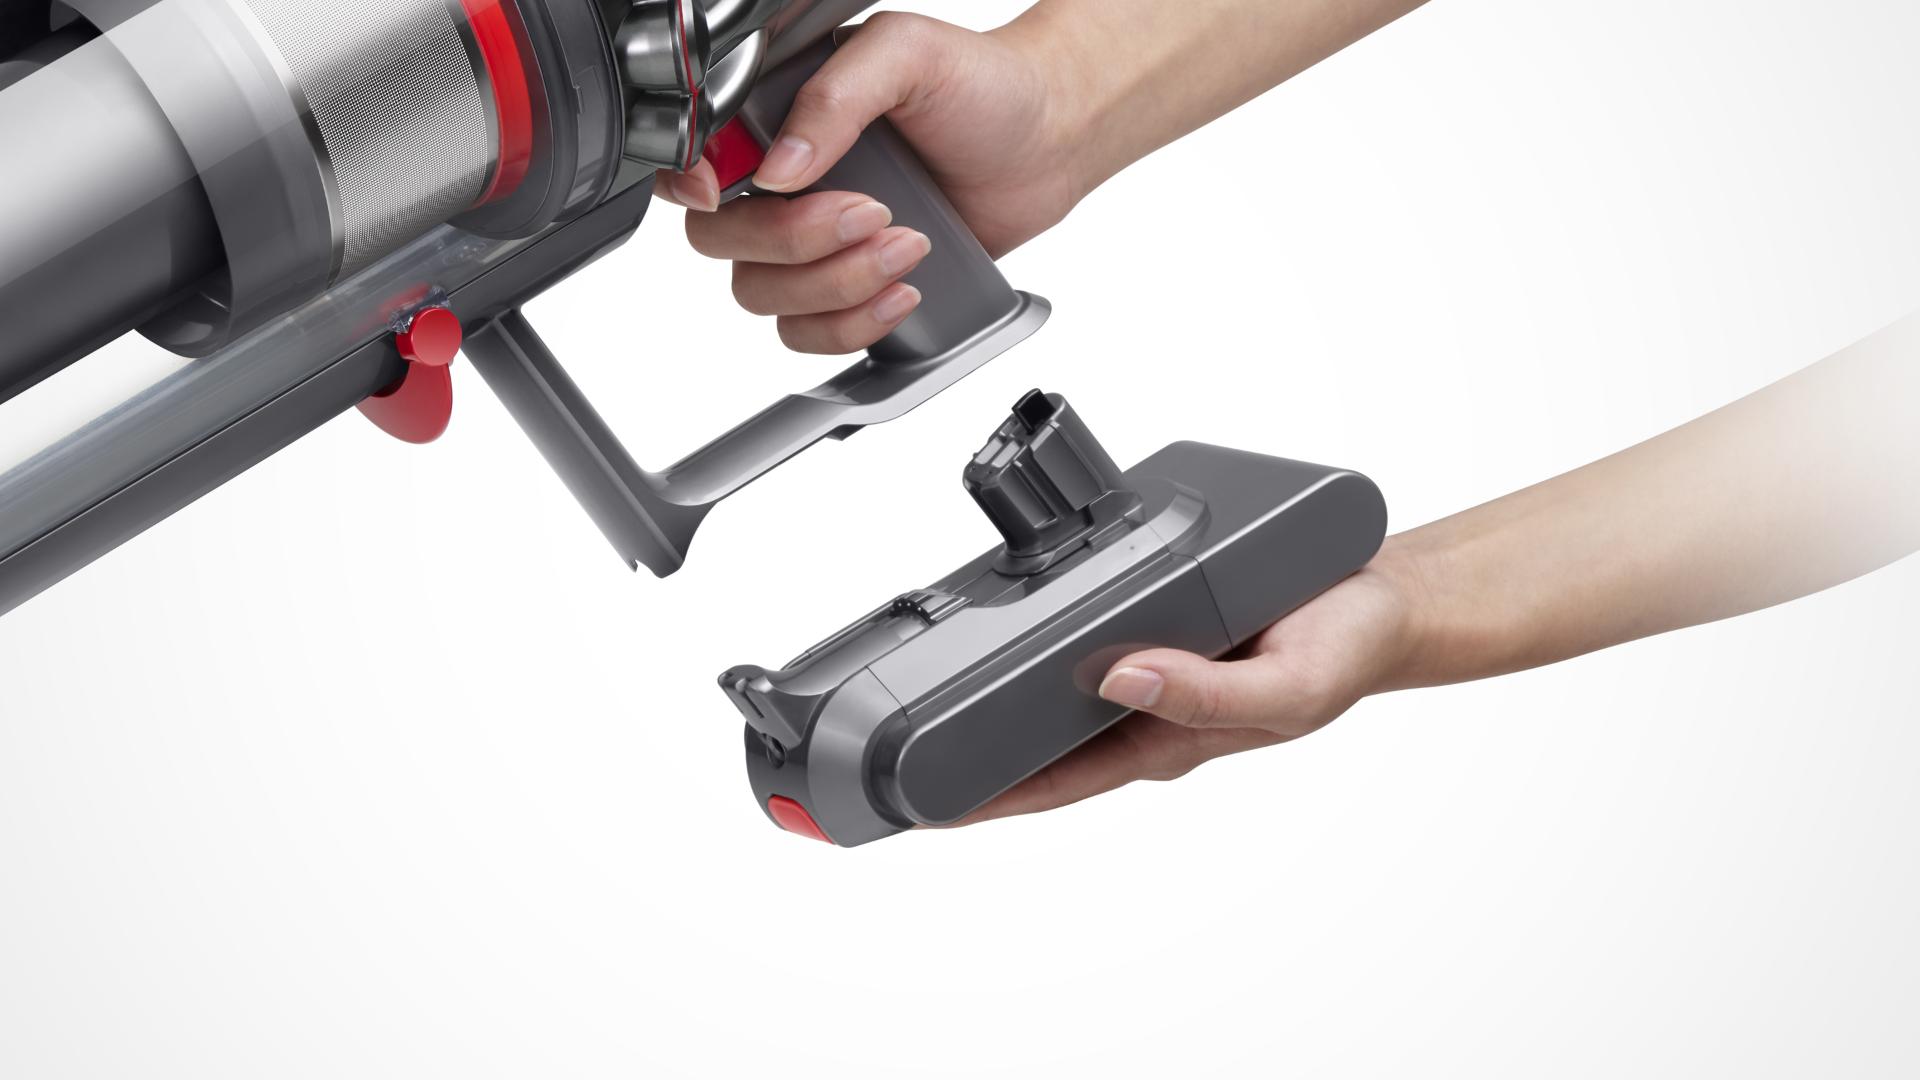 The Dyson V11 Outsize vacuum click-in battery